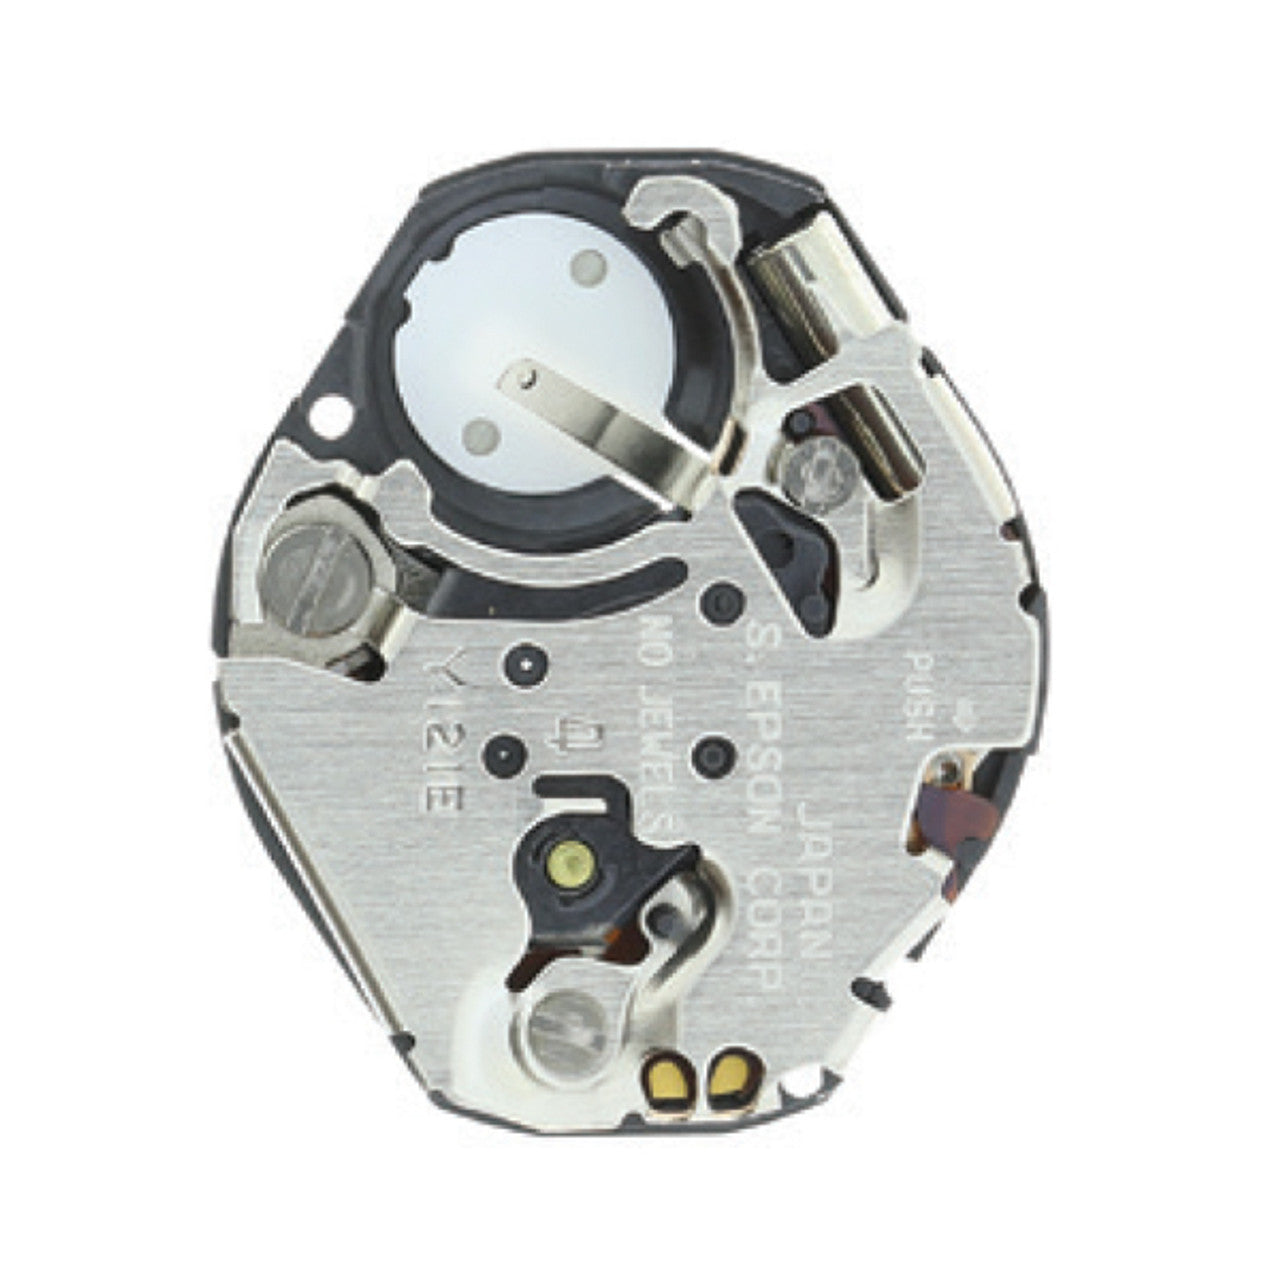 Y121E Height 2 Epson Watch Movement